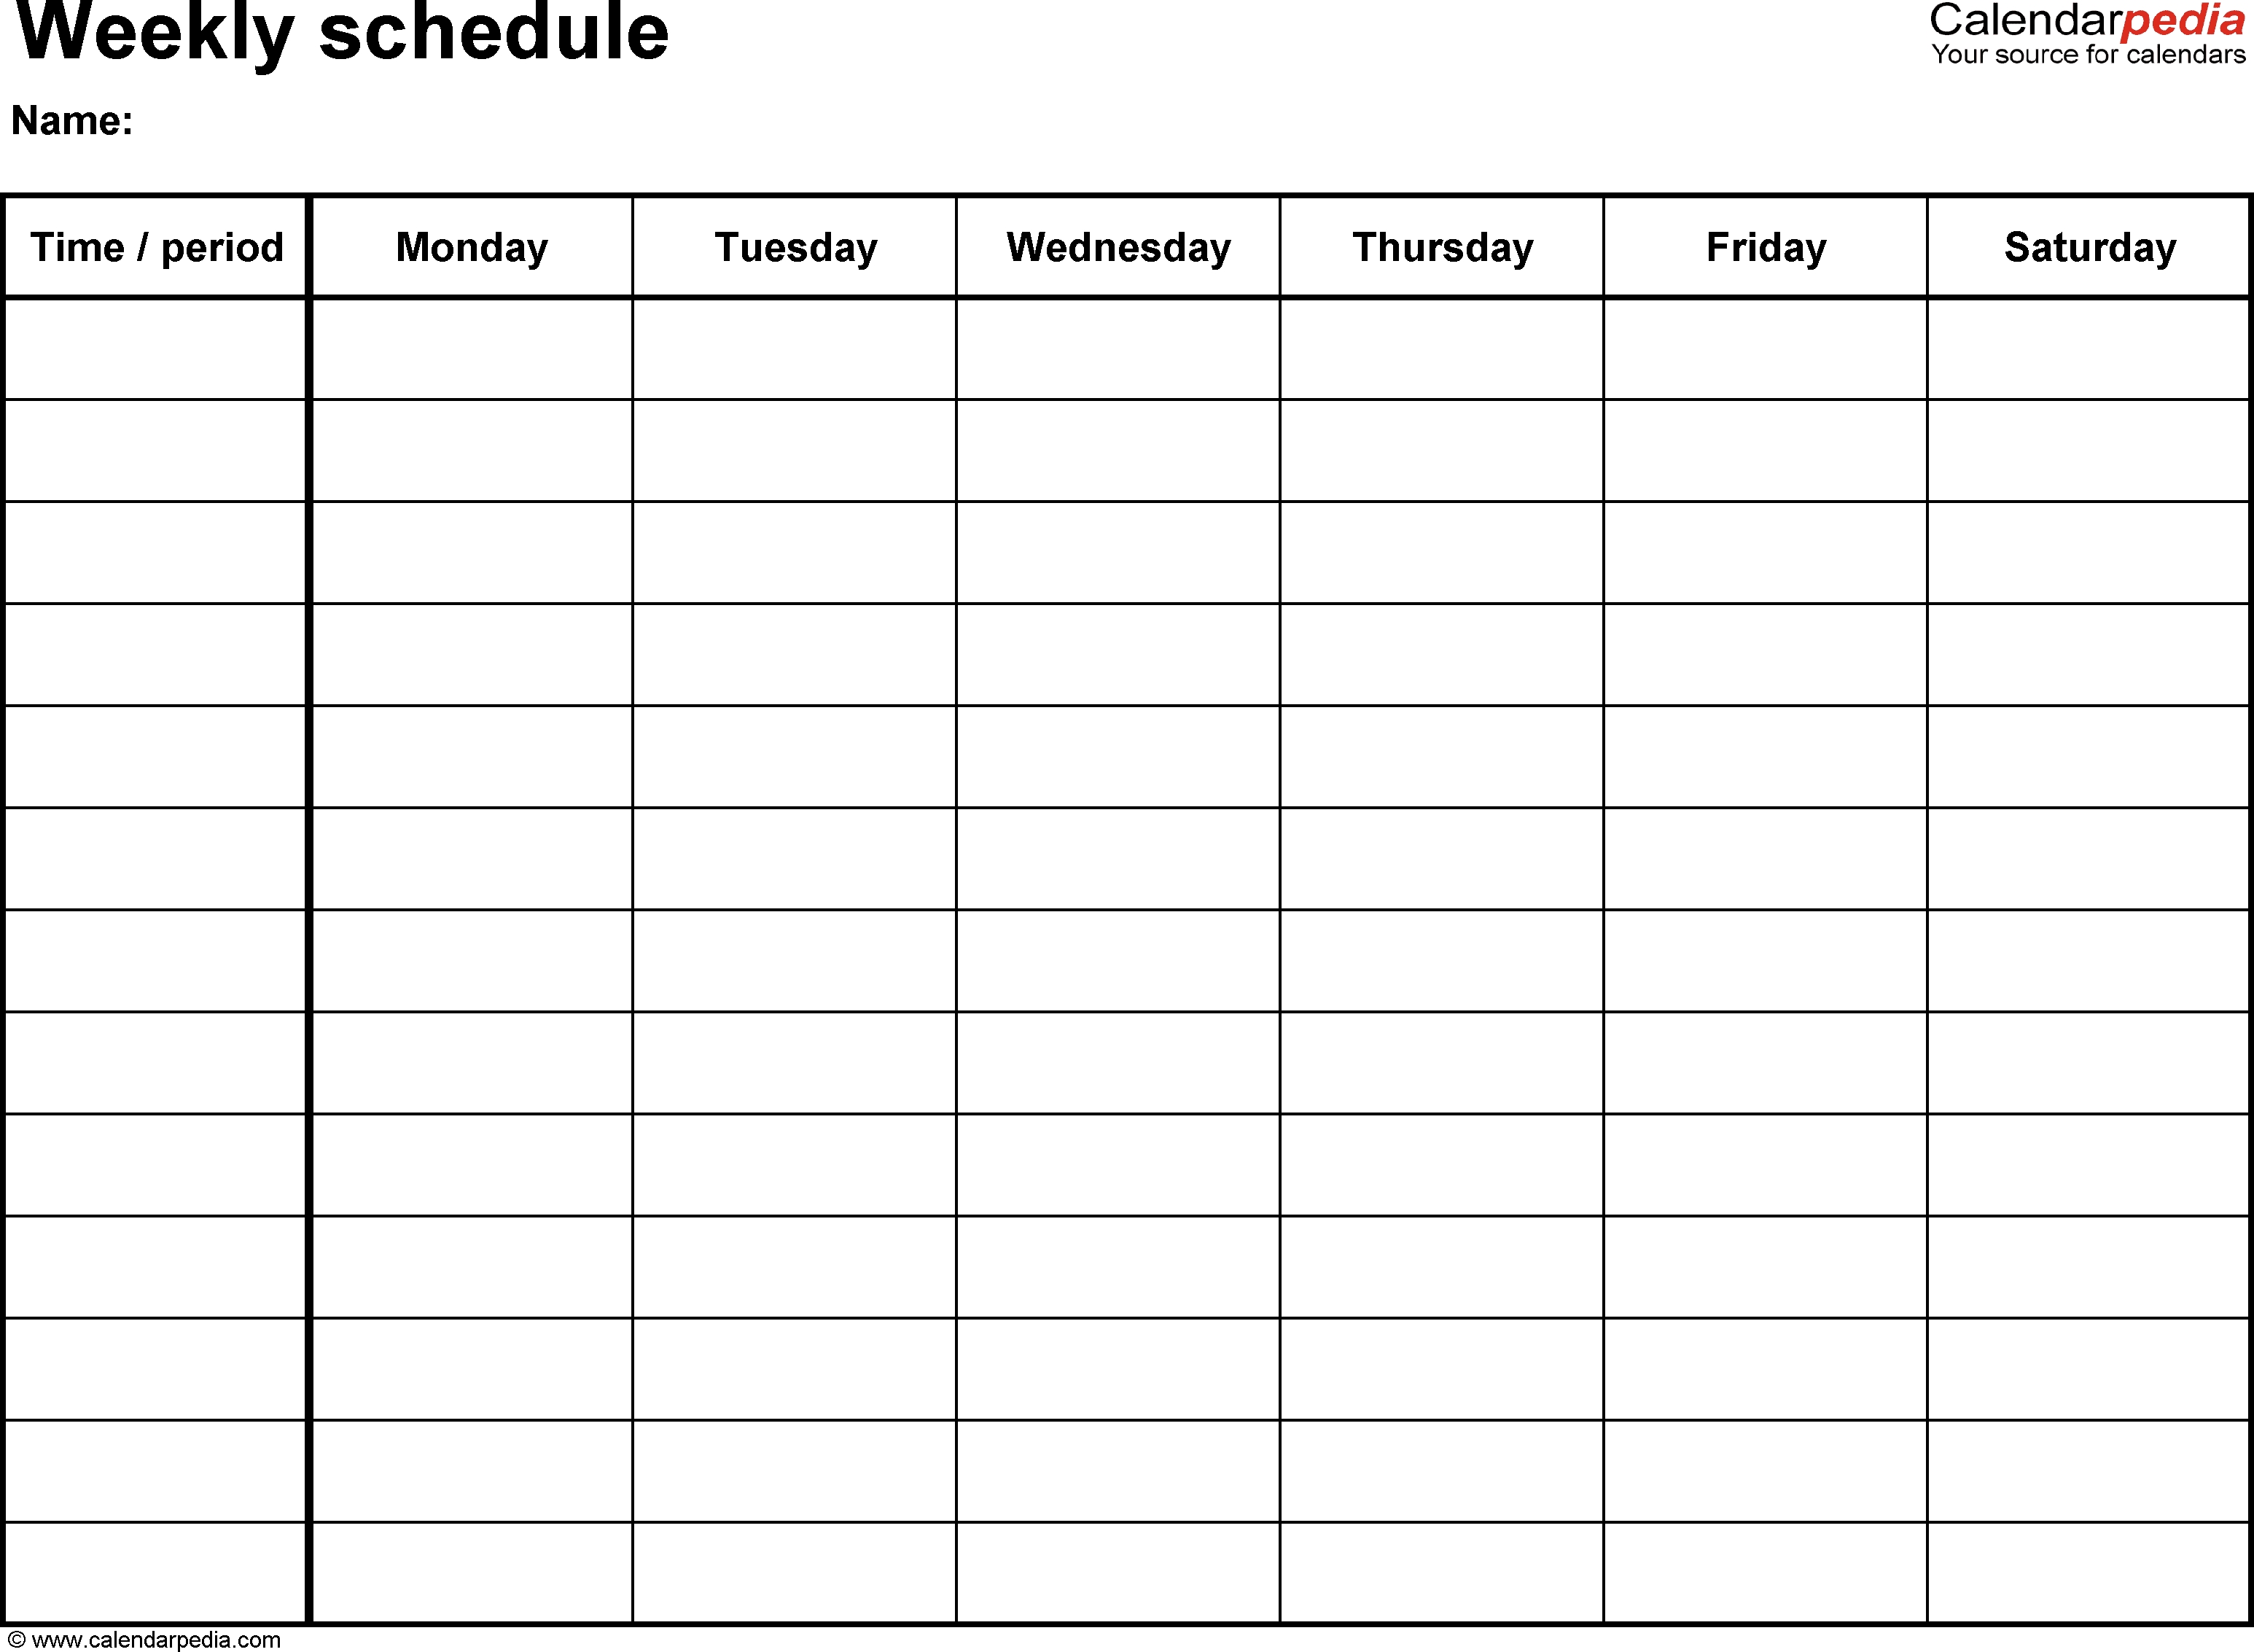 Free Weekly Schedule Templates For Word - 18 Templates Calendar Template To Fill In And Print